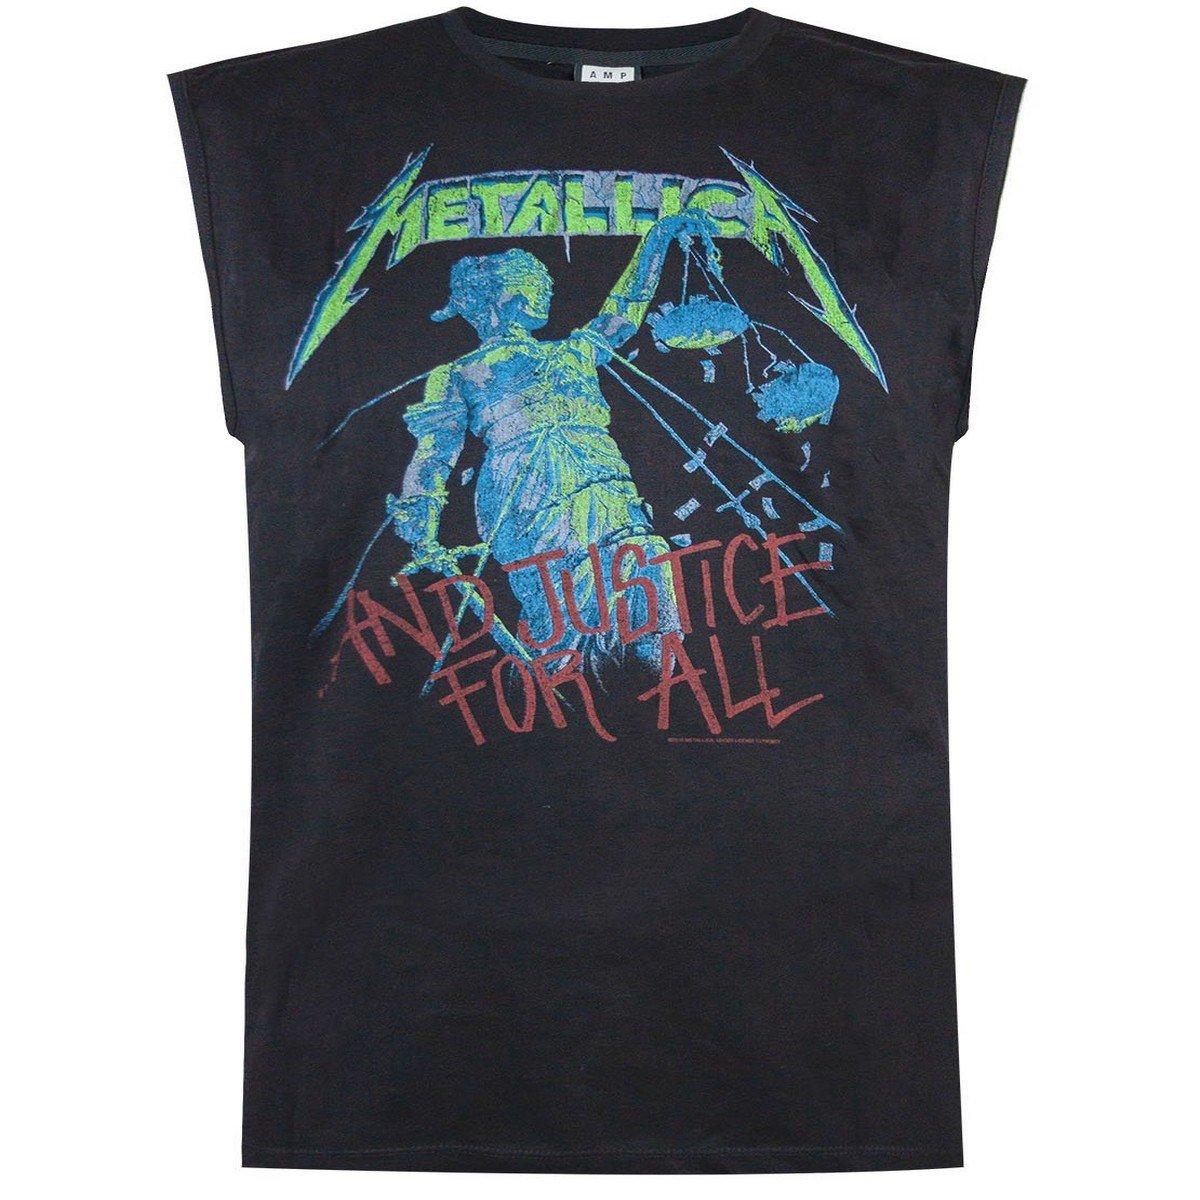 Amplified  "Justice For All" TShirt 